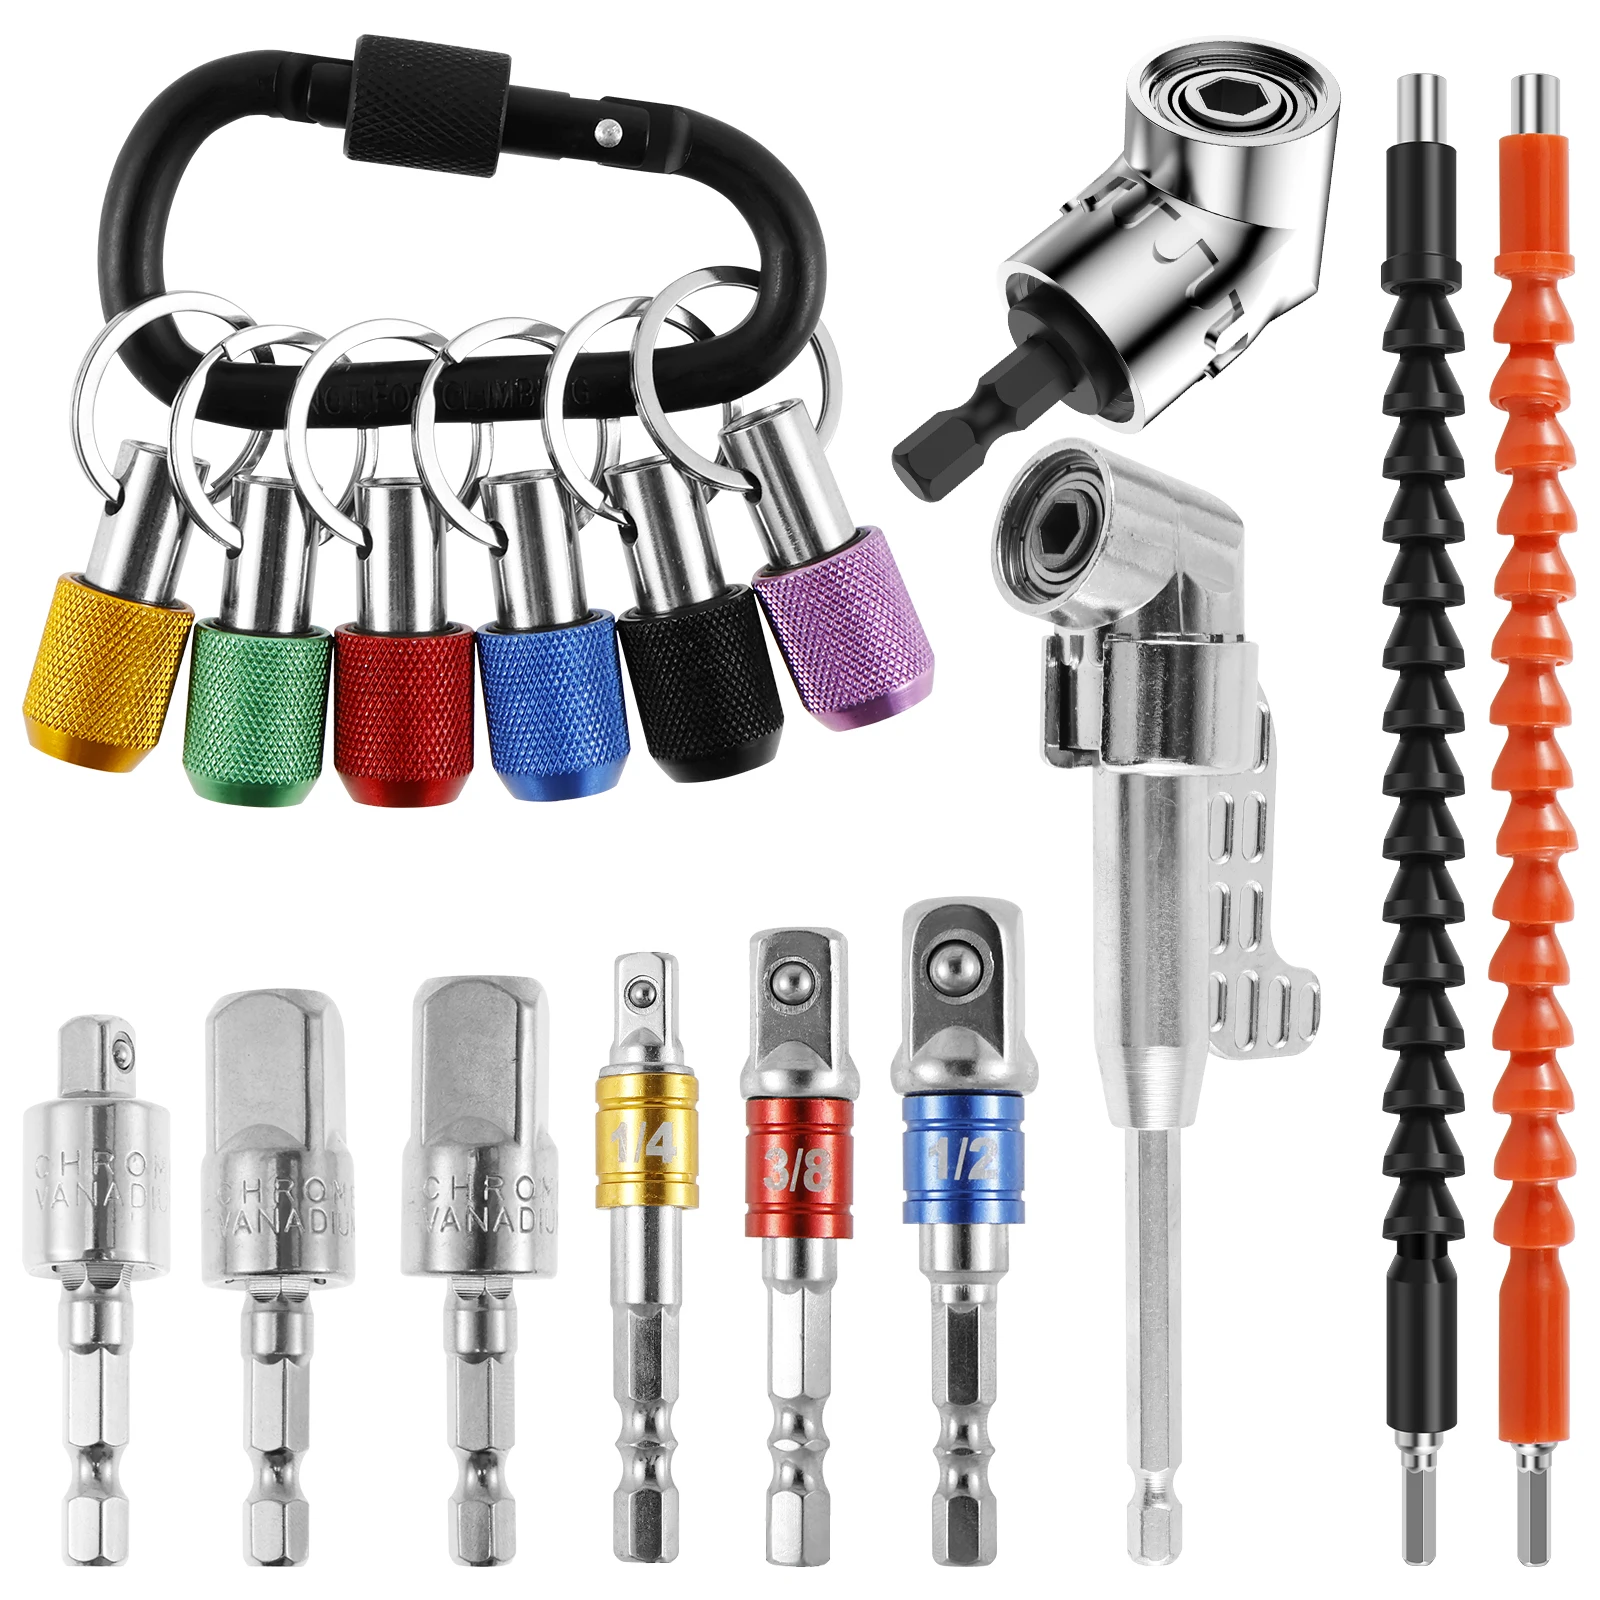 

6Pcs 1/4 Inch Hex Shank Screwdriver Bit Holder Universal Bit Holder Keychain with 105° Right Angle Drill Attachment Flexible